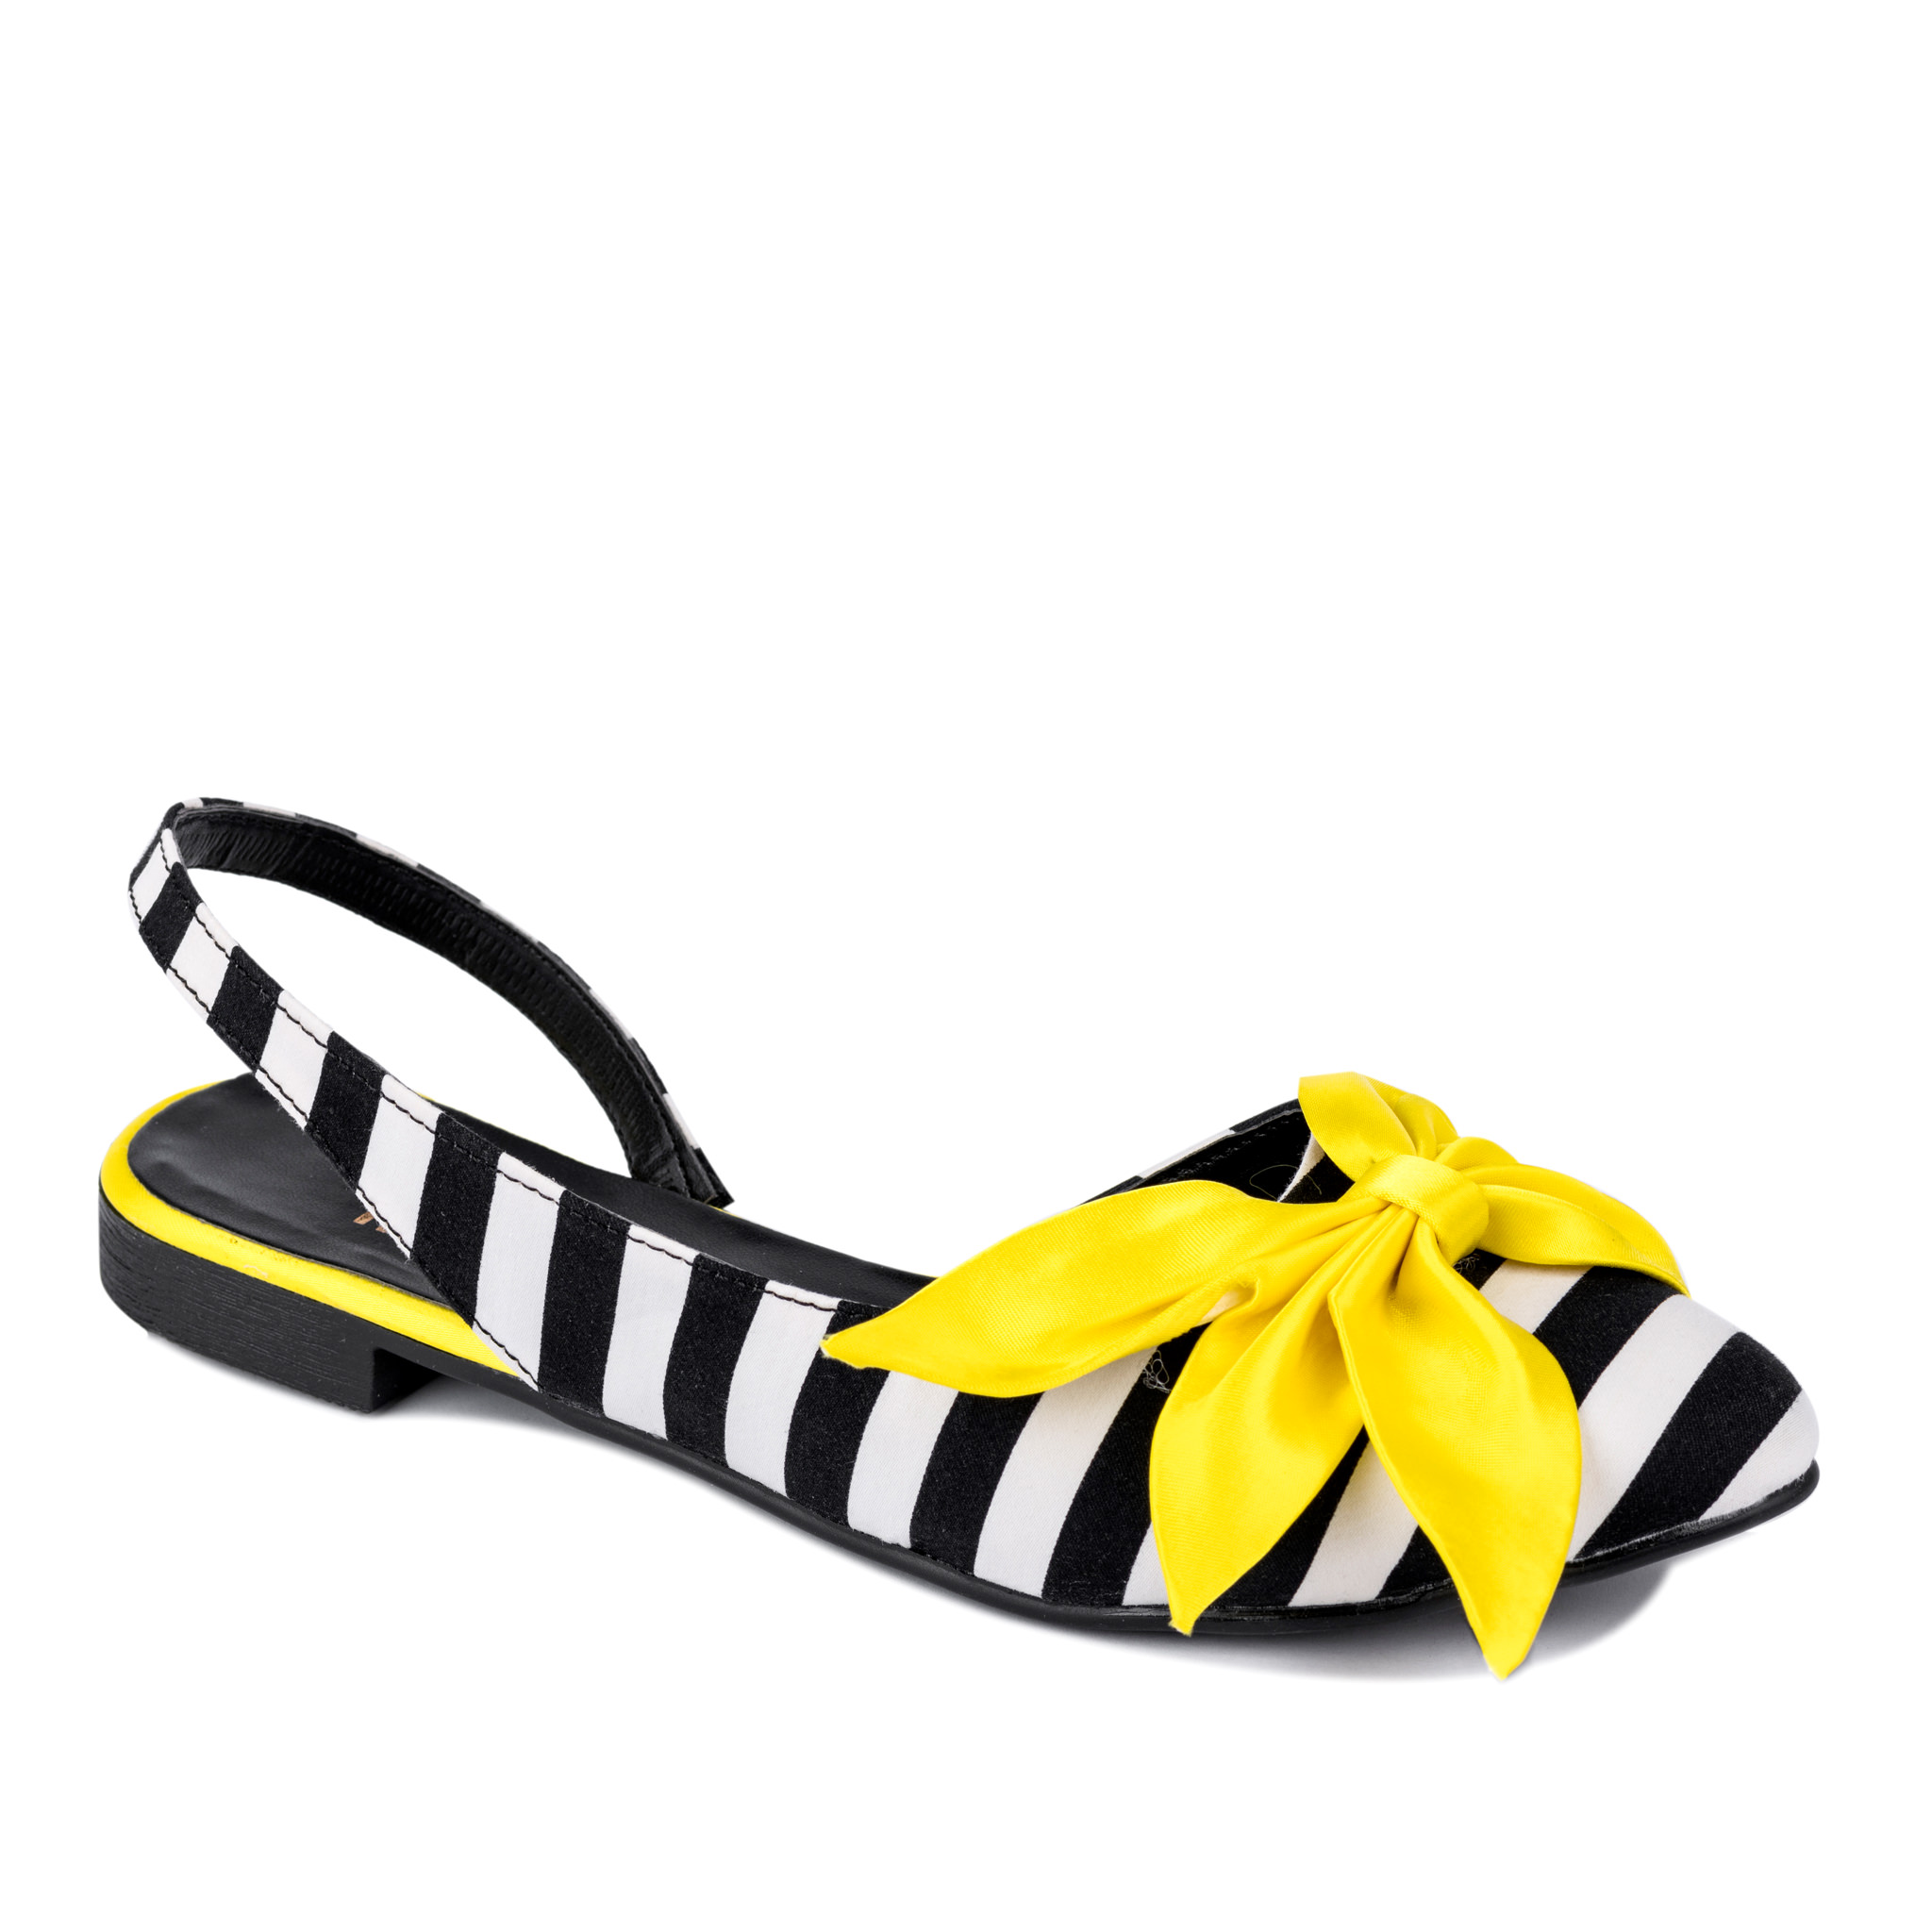 STRIPED FLATS WITH YELLOW BOW - BLACK/WHITE